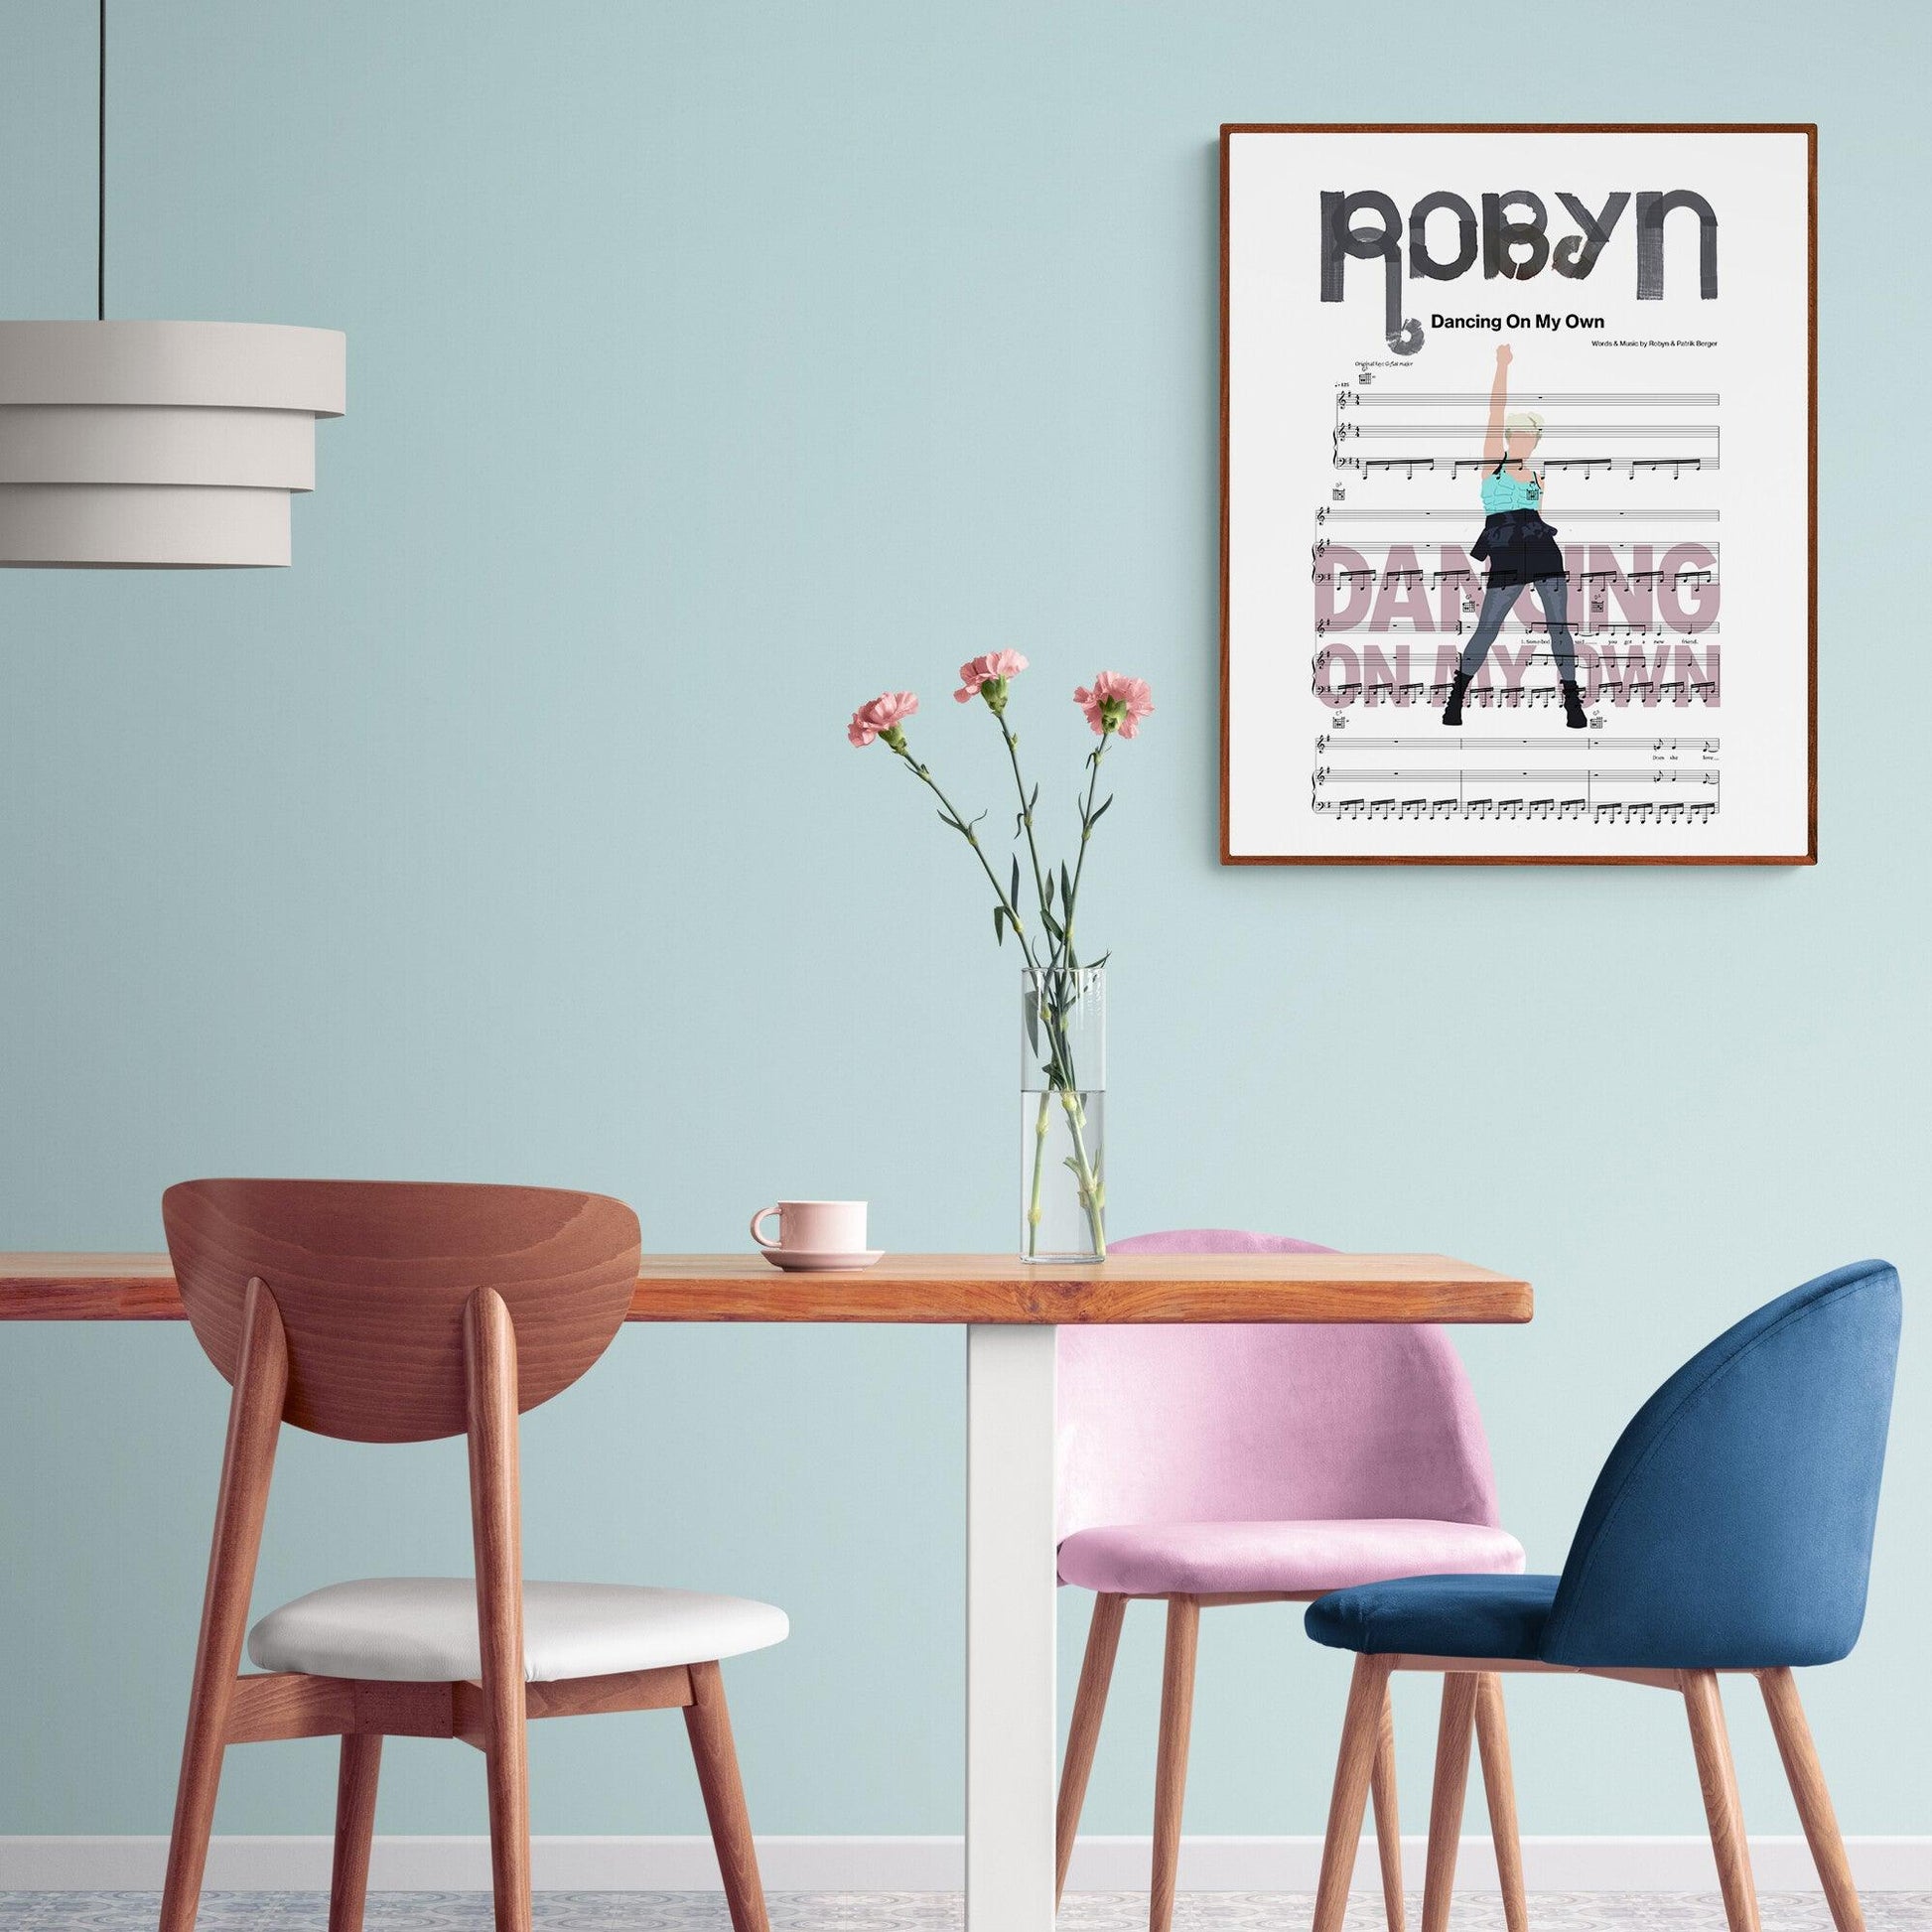 This Robyn - Dancing on My Own Poster includes a customized song lyrics graphic in a personalized frame, rendering it an ideal choice for admirers. Its long-lasting design is suitable for song lyric art designs, song lyric posters, or song lyric prints.